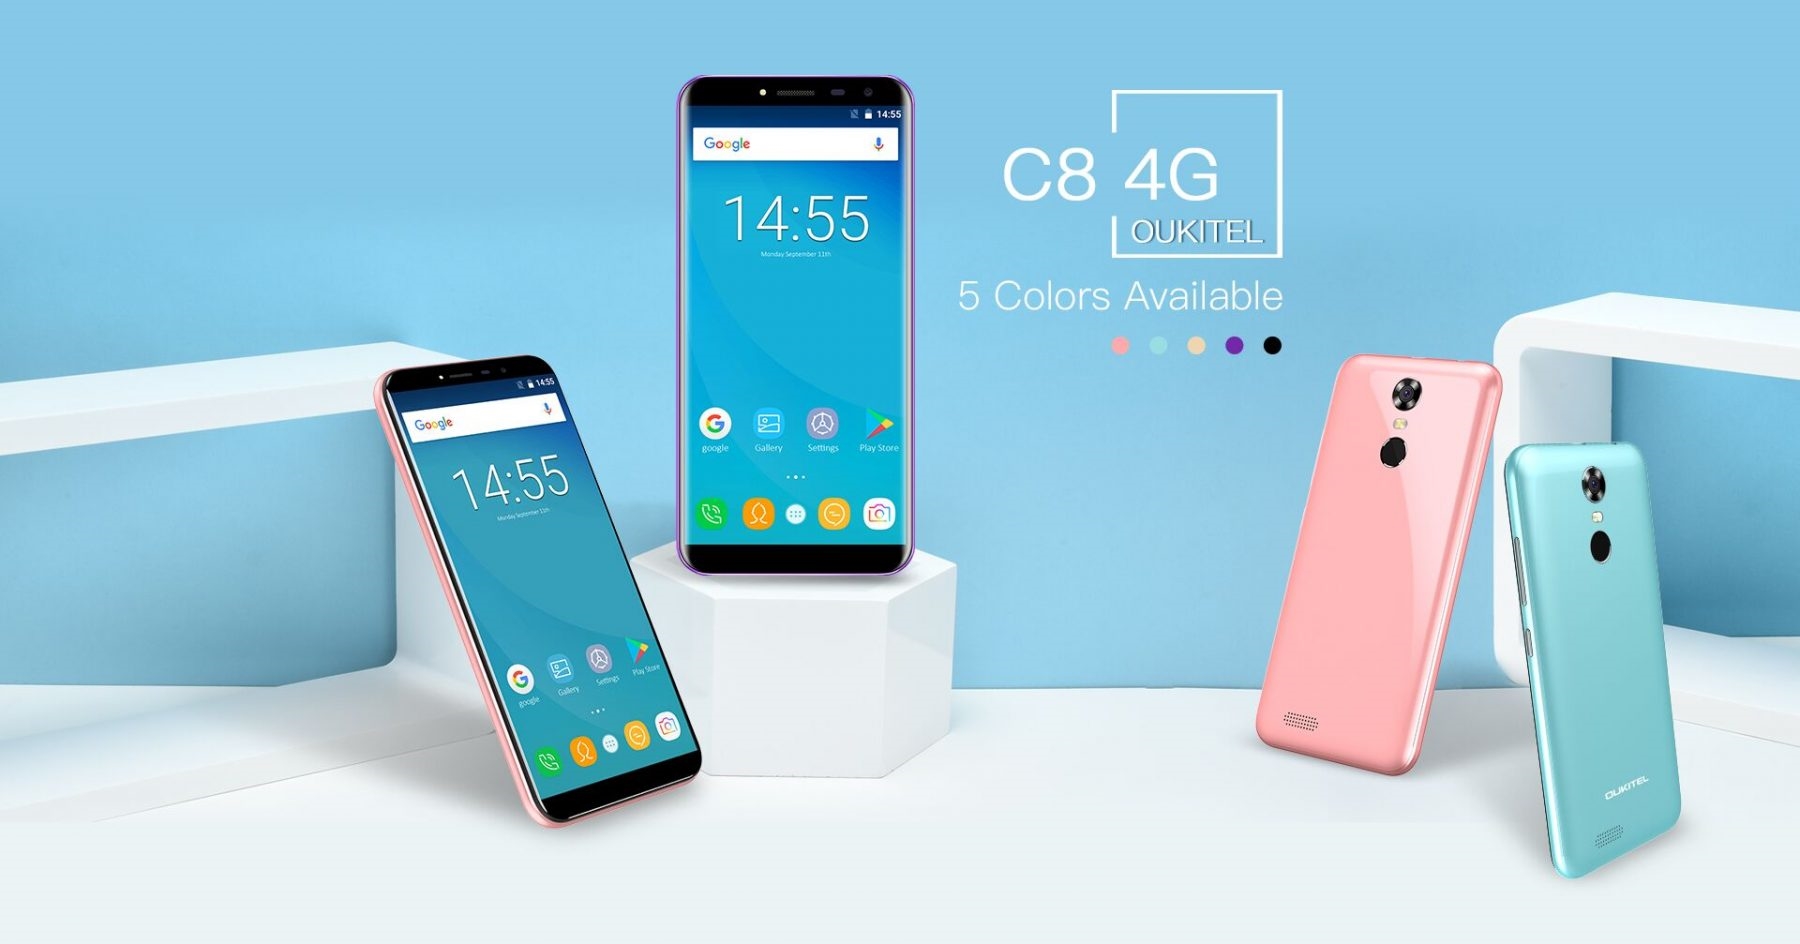 OUKITEL C8 4G Announced to Bring Better Connectivity Than the Original C8 | DeviceDaily.com